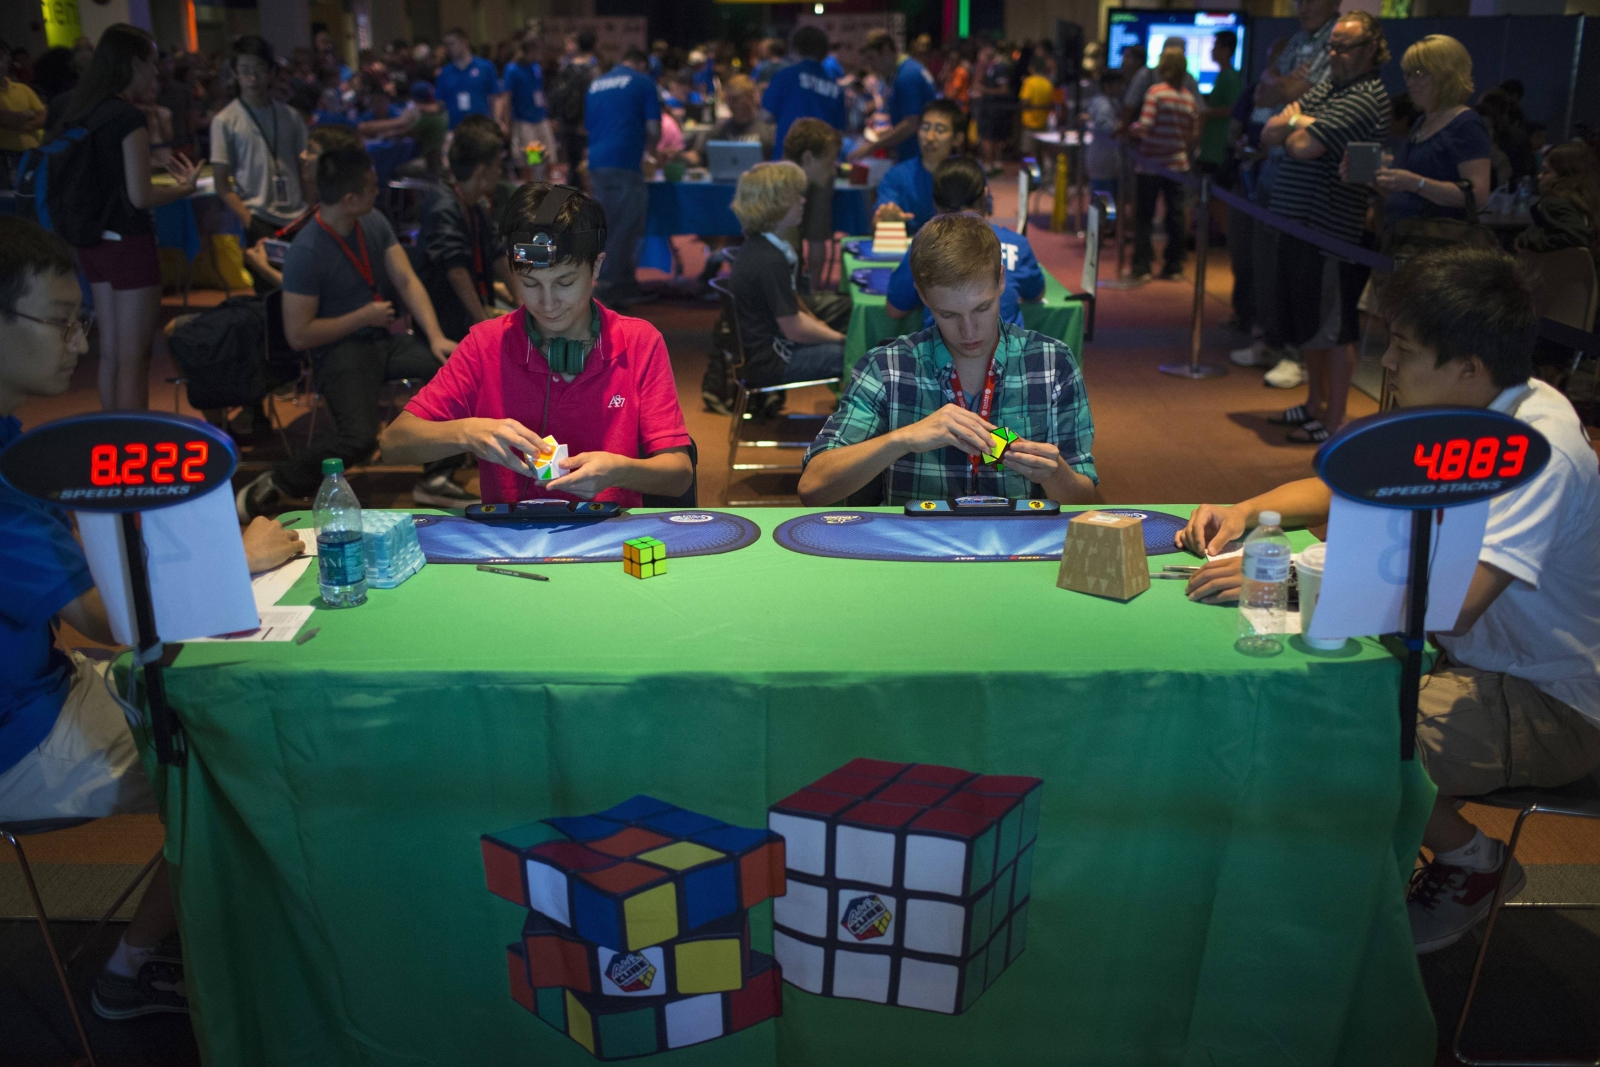 Participants compete at the National Rubiks Cube Championship.